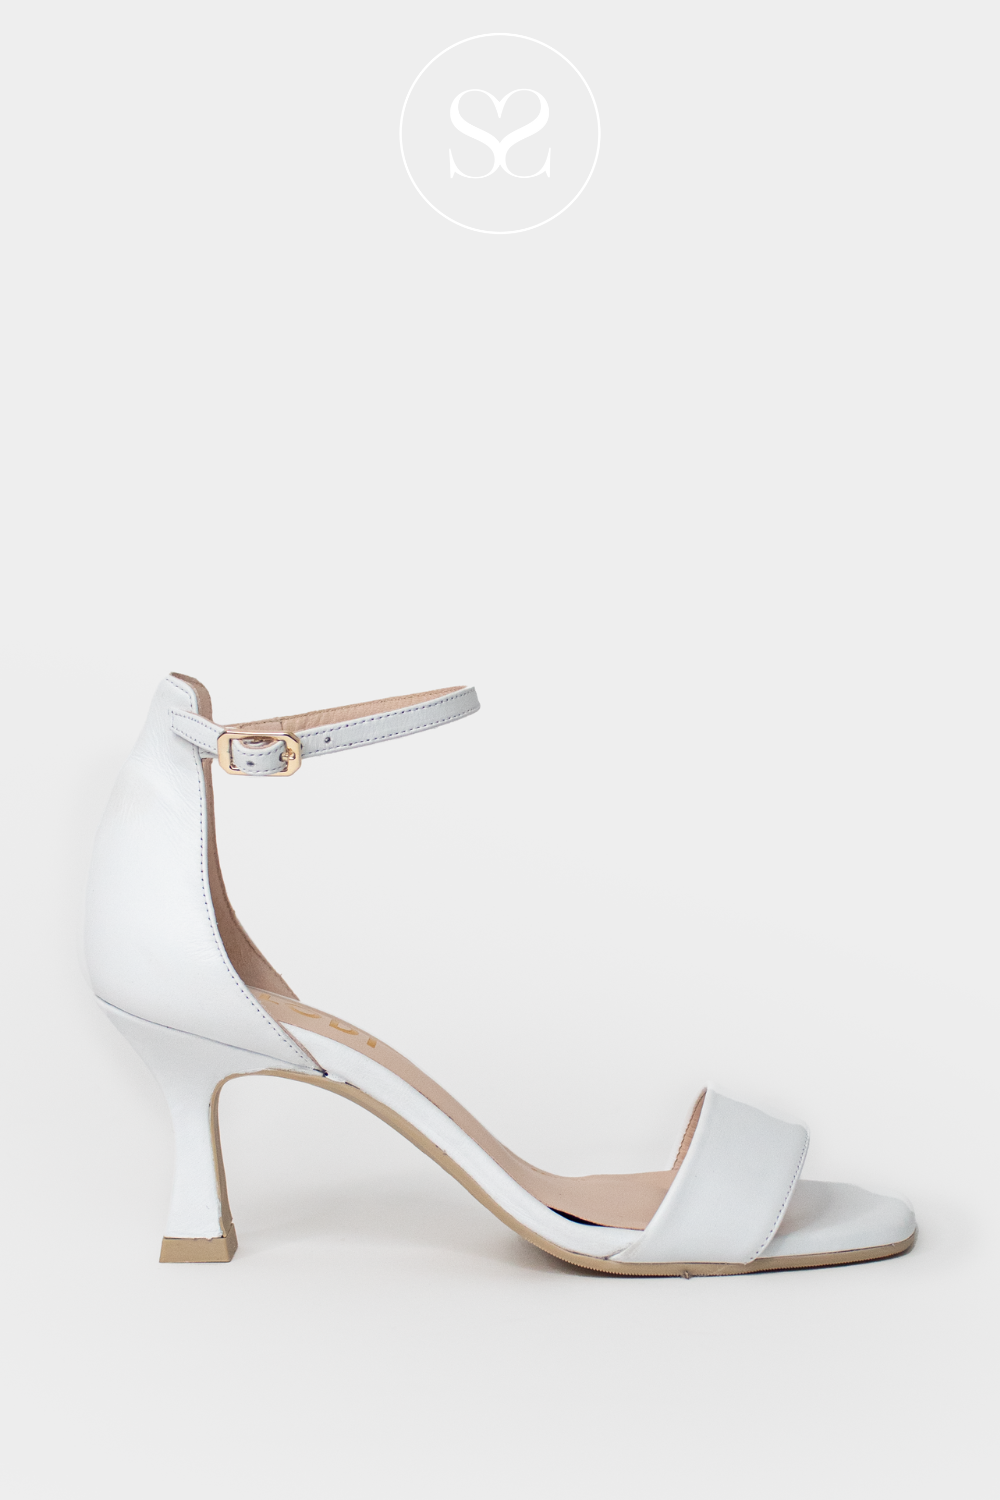 LODI LISCO BARELY THERE SANDALS IN WHITE LEATHER